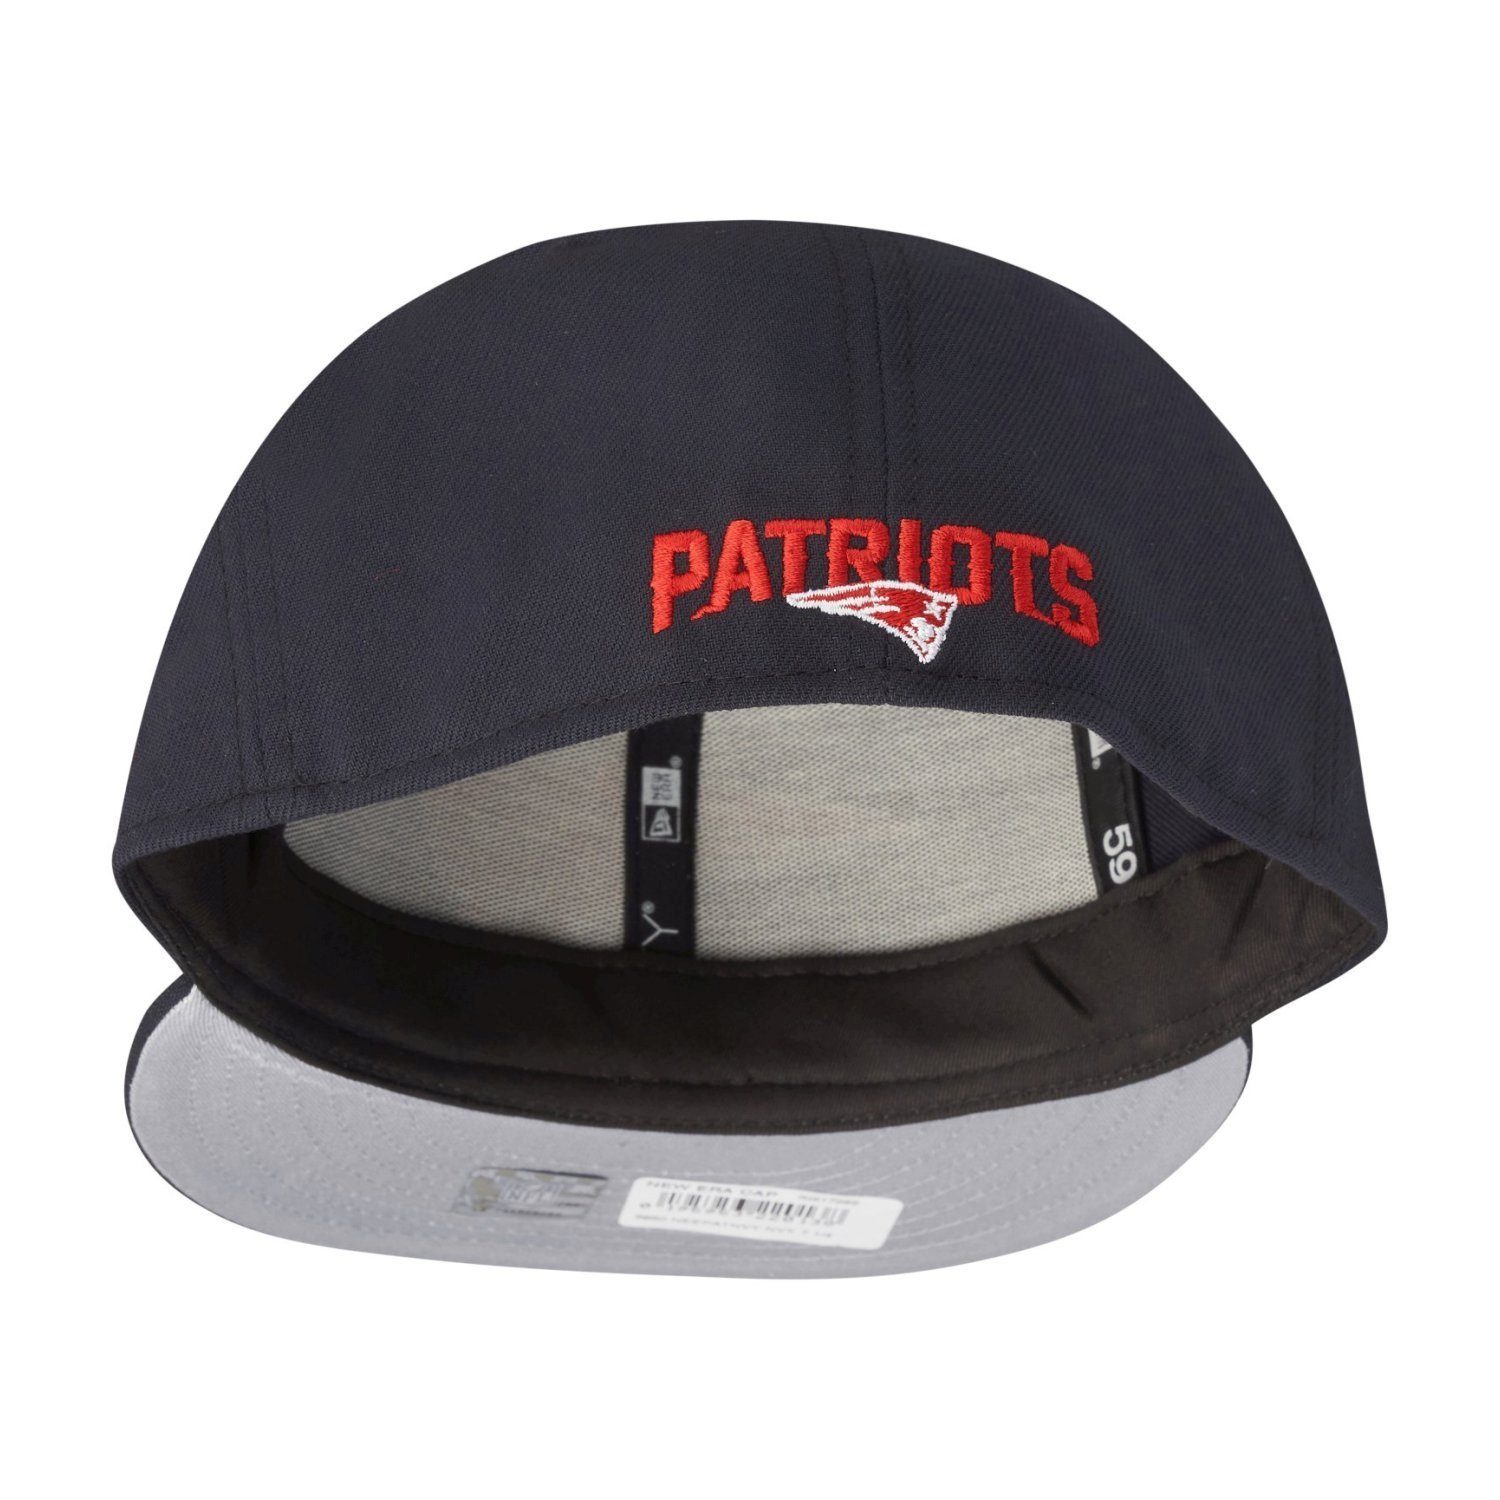 New Cap red TEAMS New Fitted England Patriots 59Fifty Era NFL